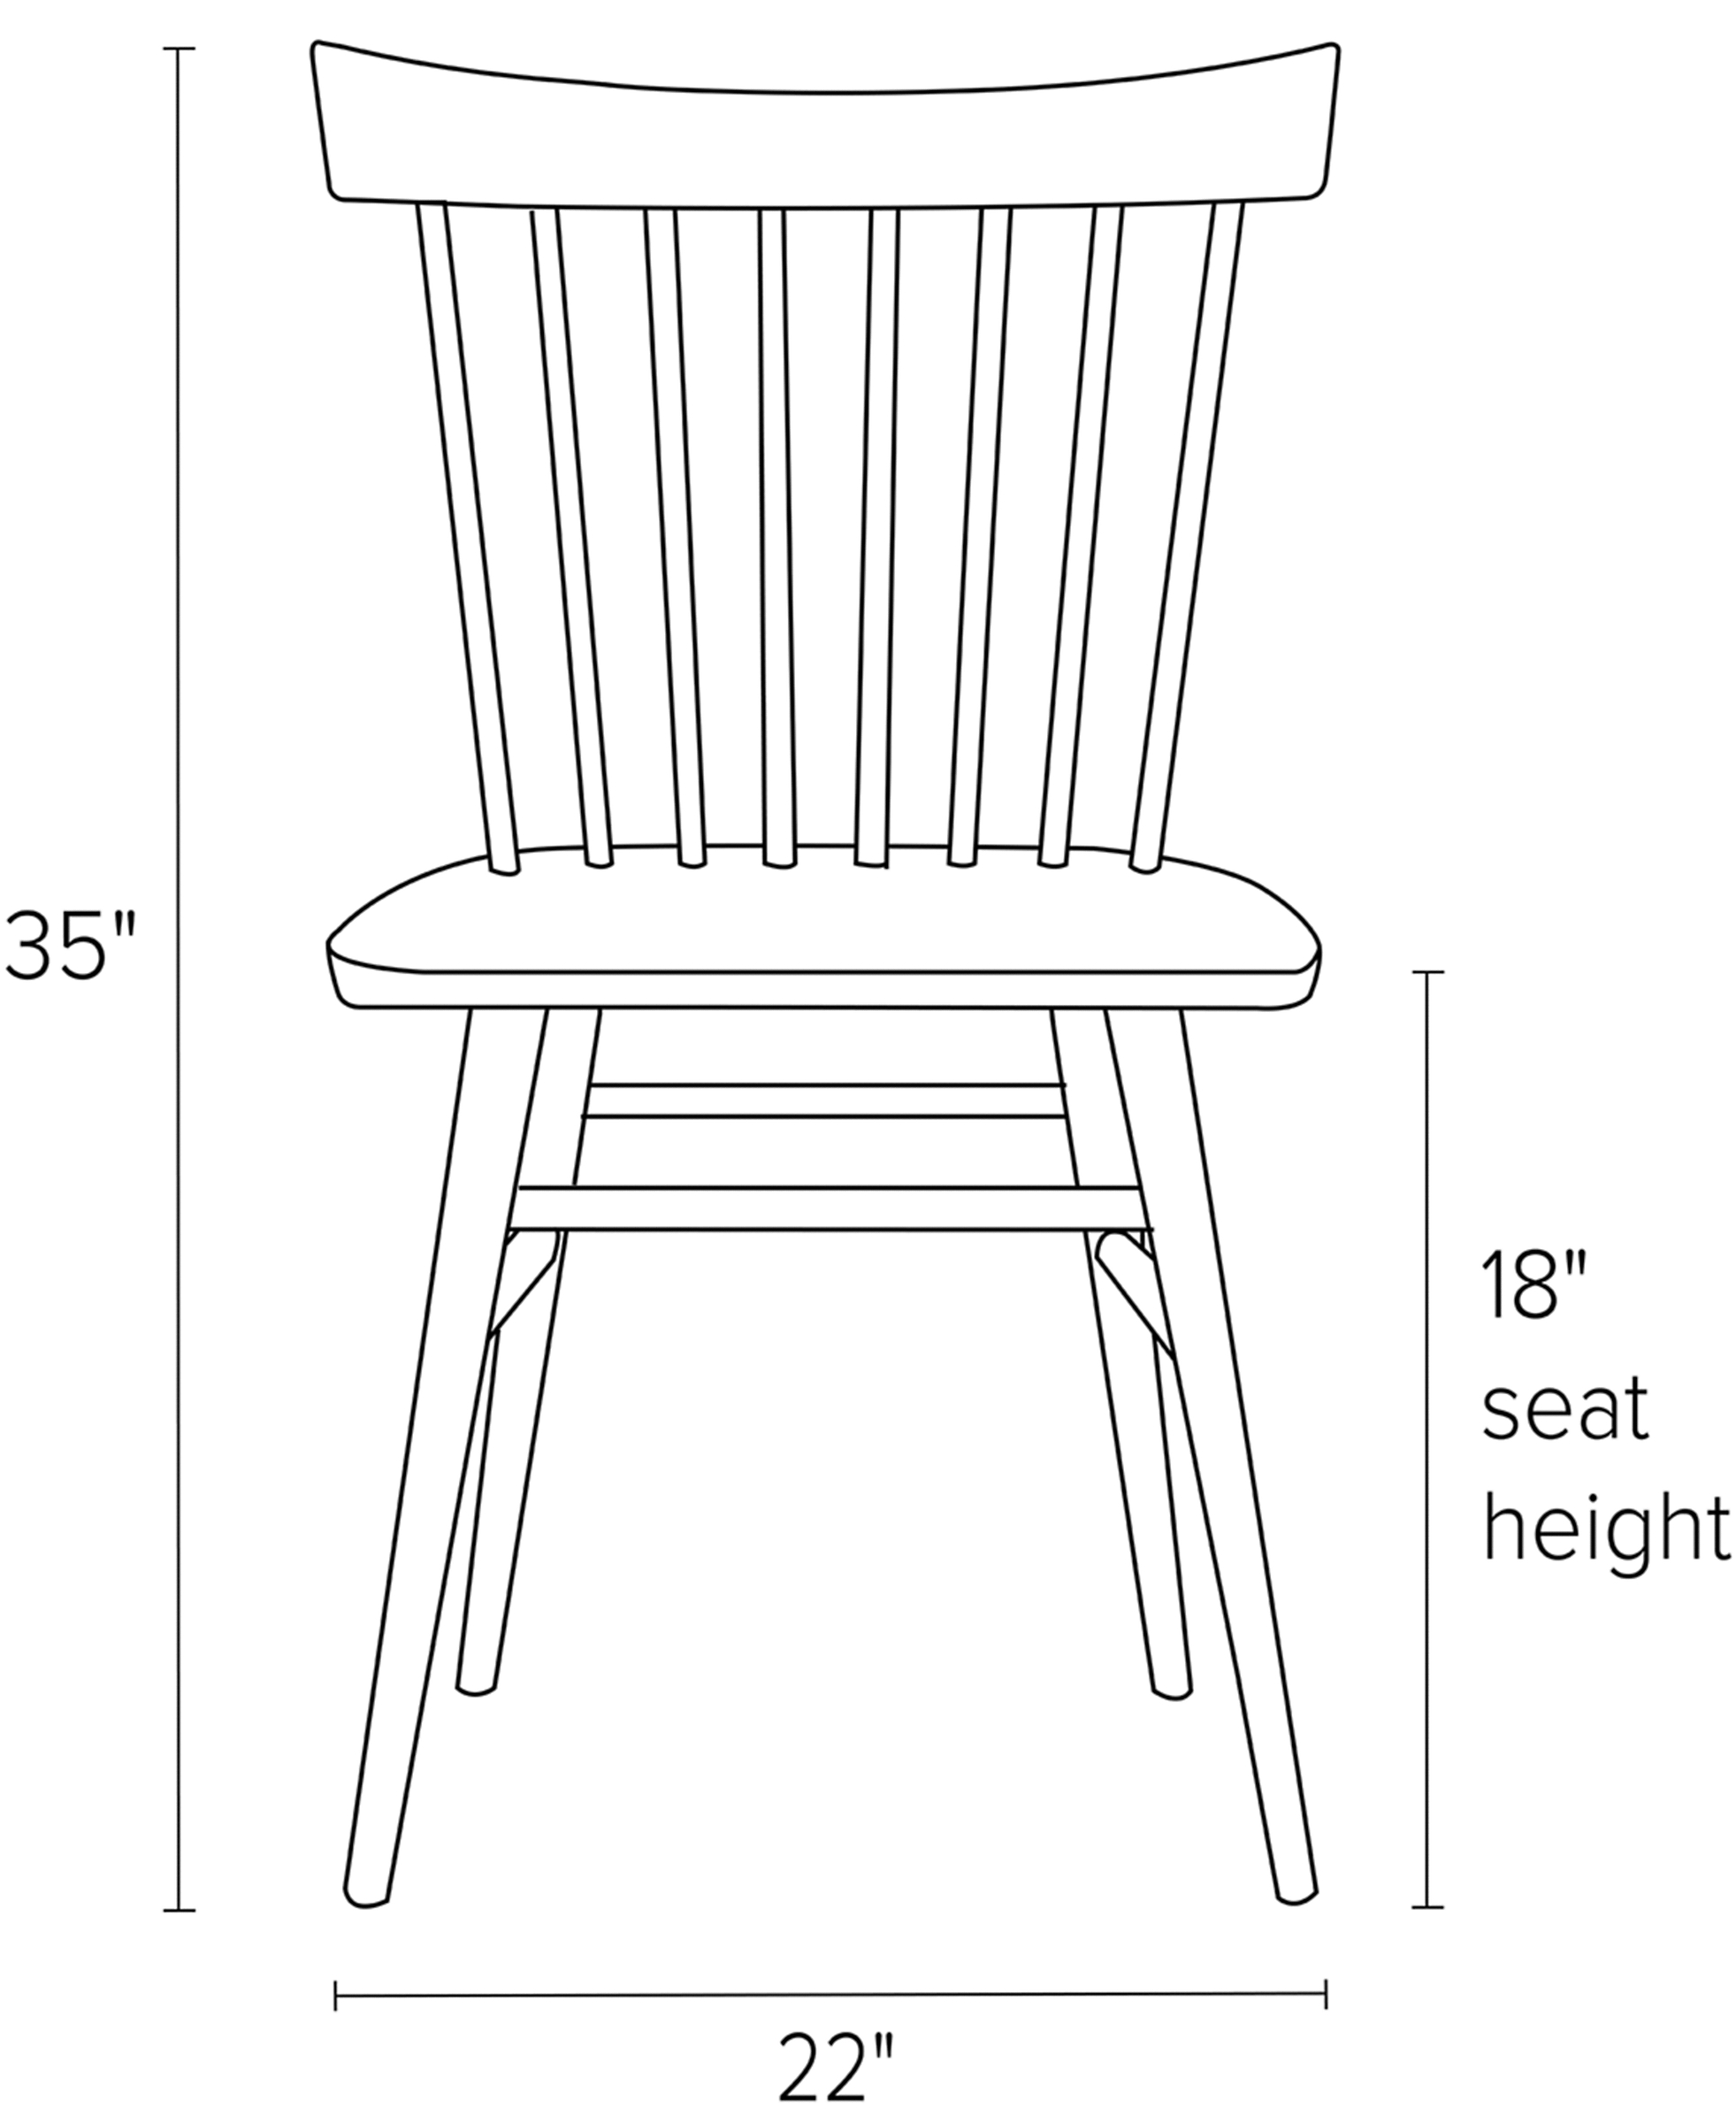 Front view dimension illustration of Thatcher side chair.